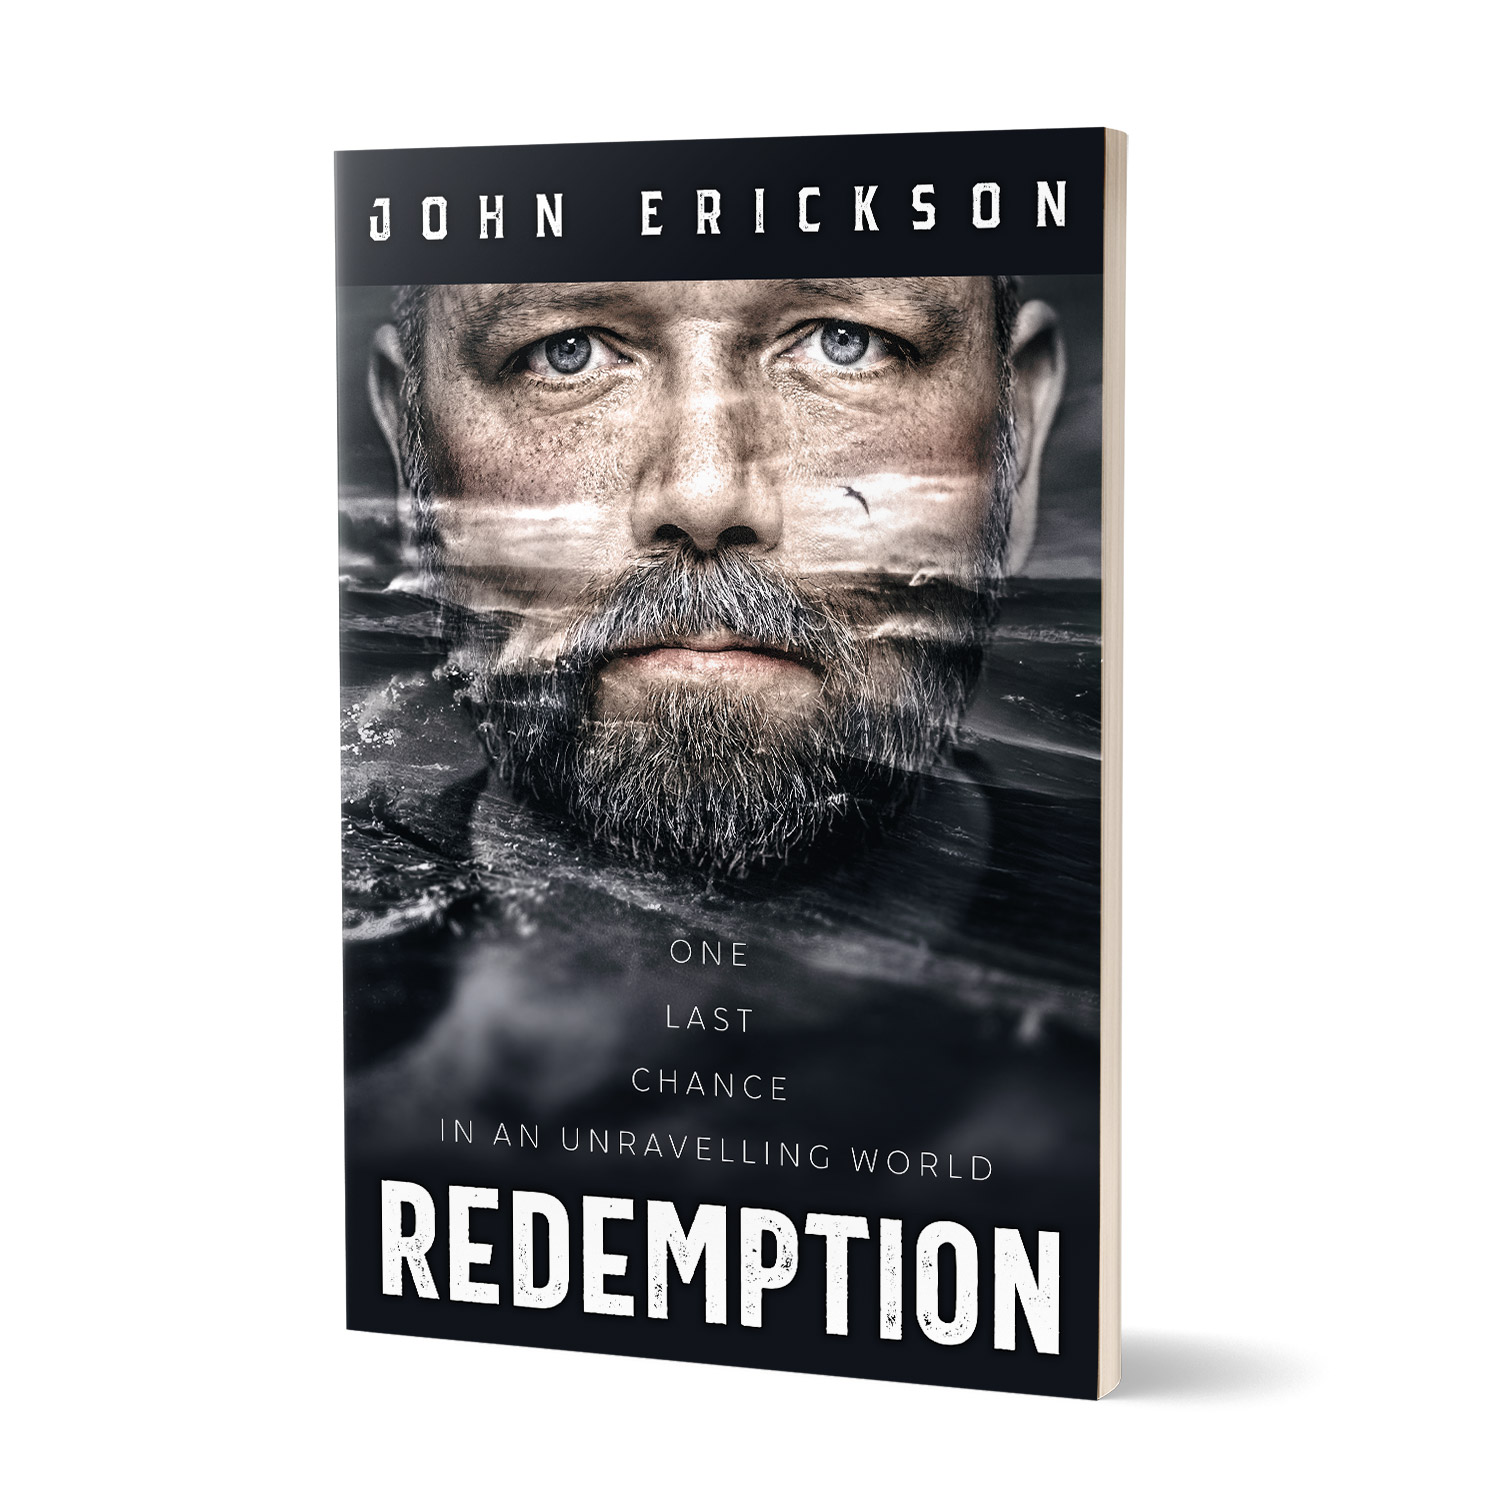 'Redemption' is a unique thriller novel by debut author, John Erickson. The book cover and interior were designed by Mark Thomas, of coverness.com. To find out more about my book design services, please visit www.coverness.com.